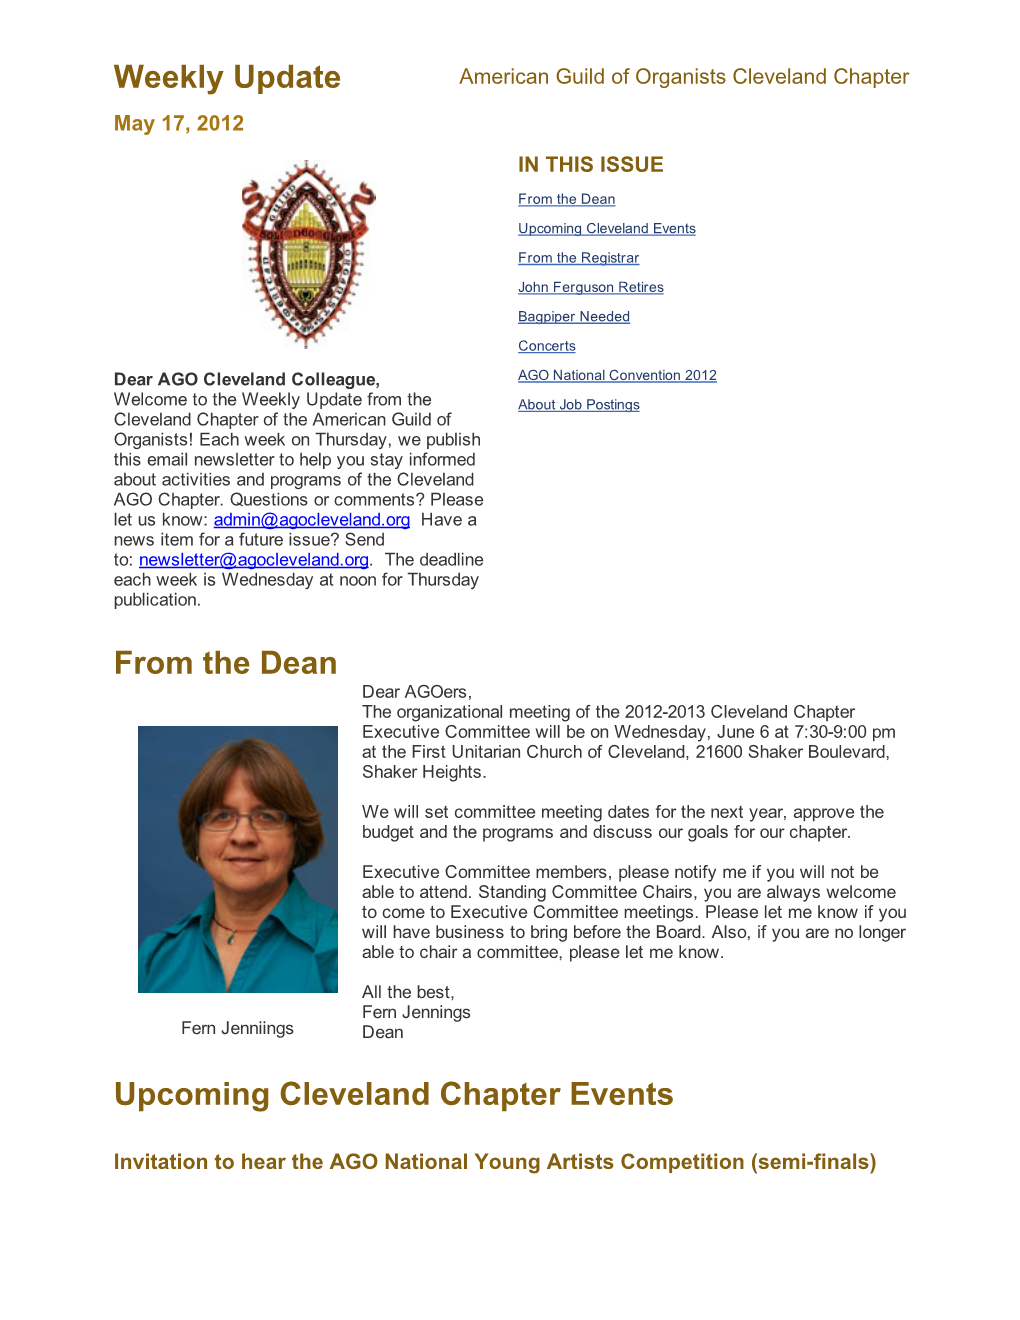 Weekly Update from the Dean Upcoming Cleveland Chapter Events